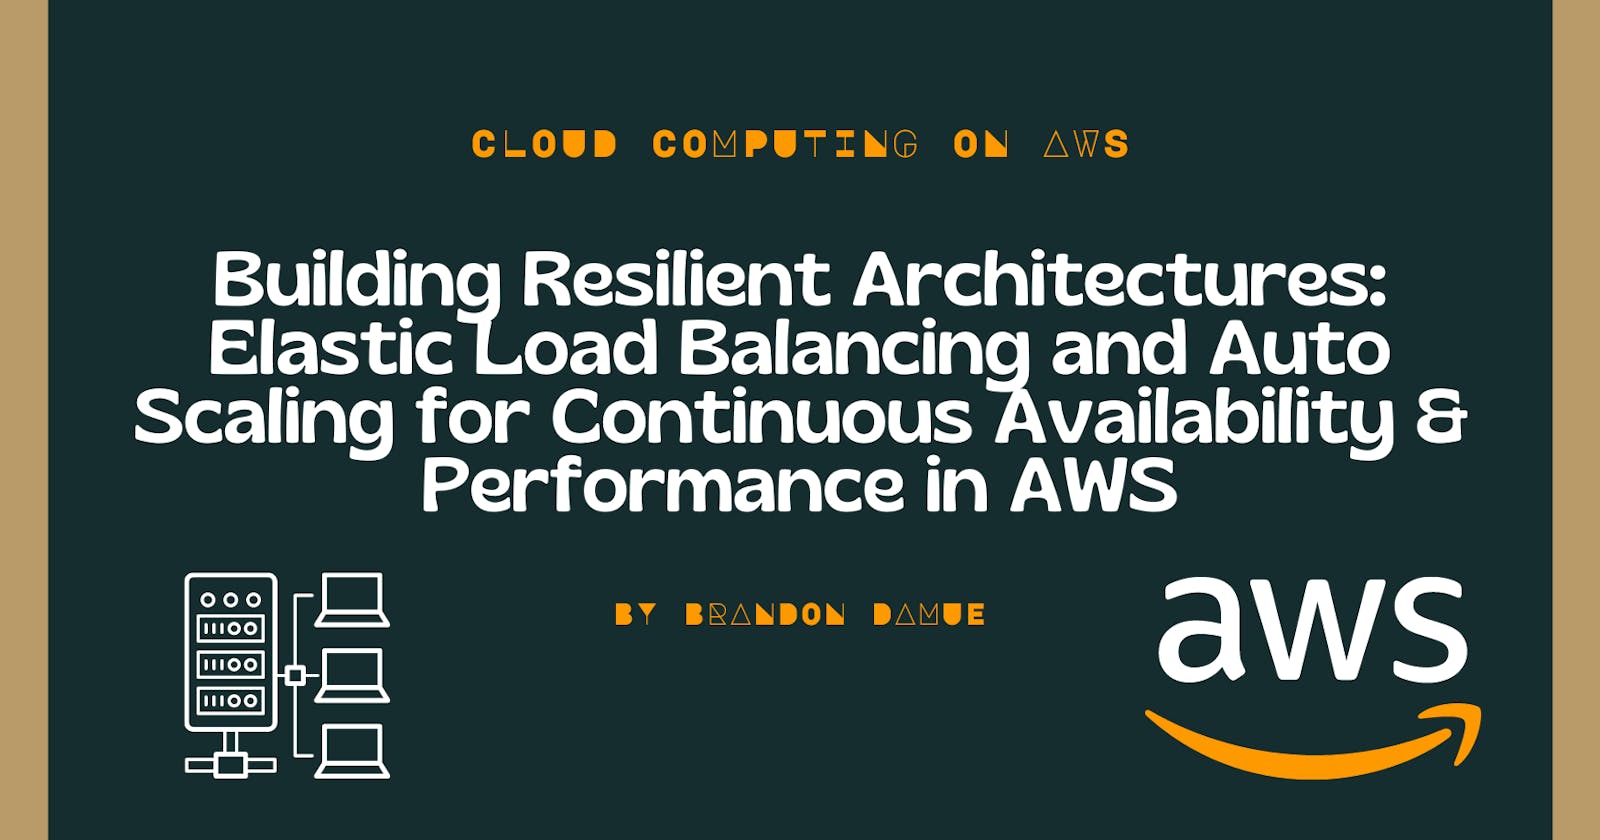 Building Resilient Architectures: Elastic Load Balancing and Auto Scaling for Continuous Availability & Performance in AWS